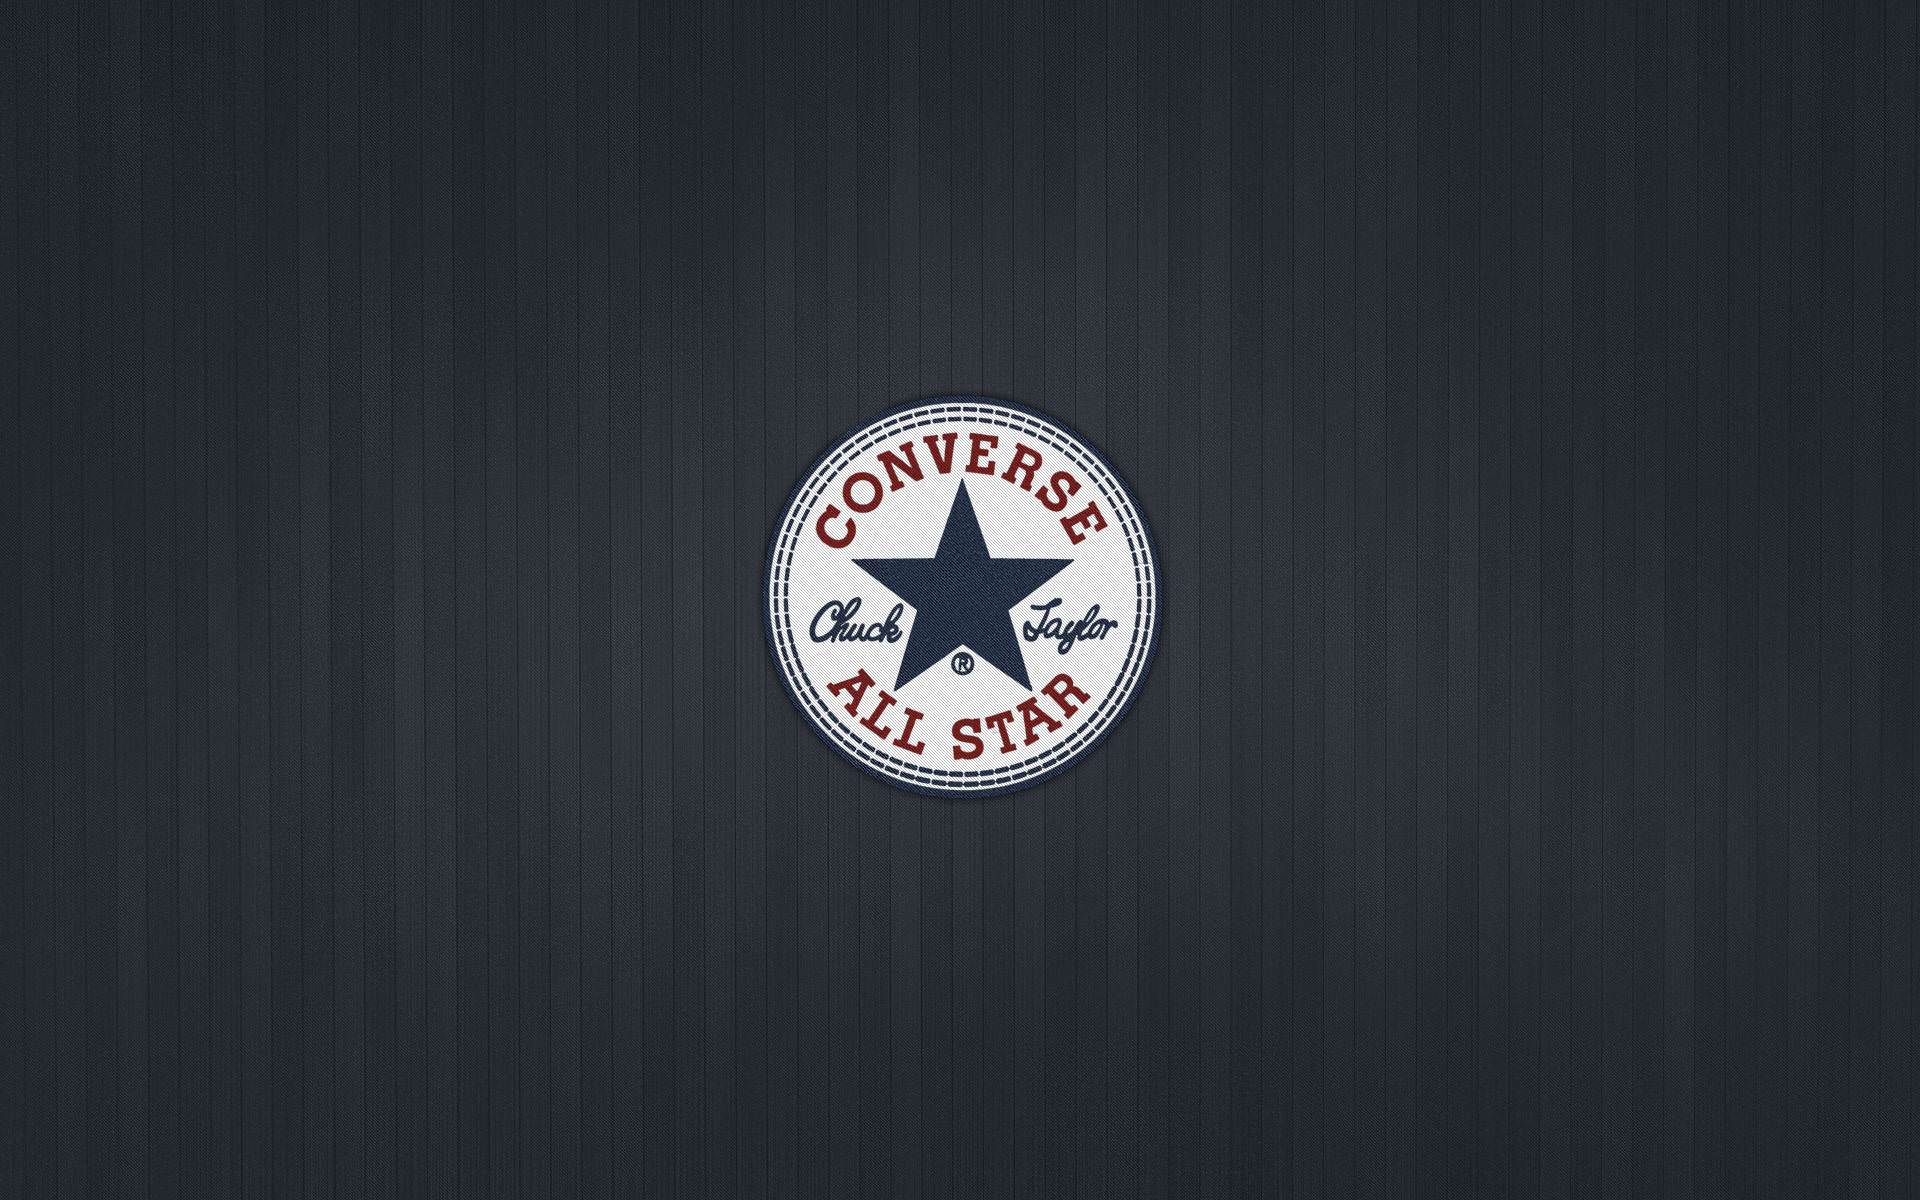 All Star Converse Chuck Taylor Picture Image Wallpaper HD Widescreen